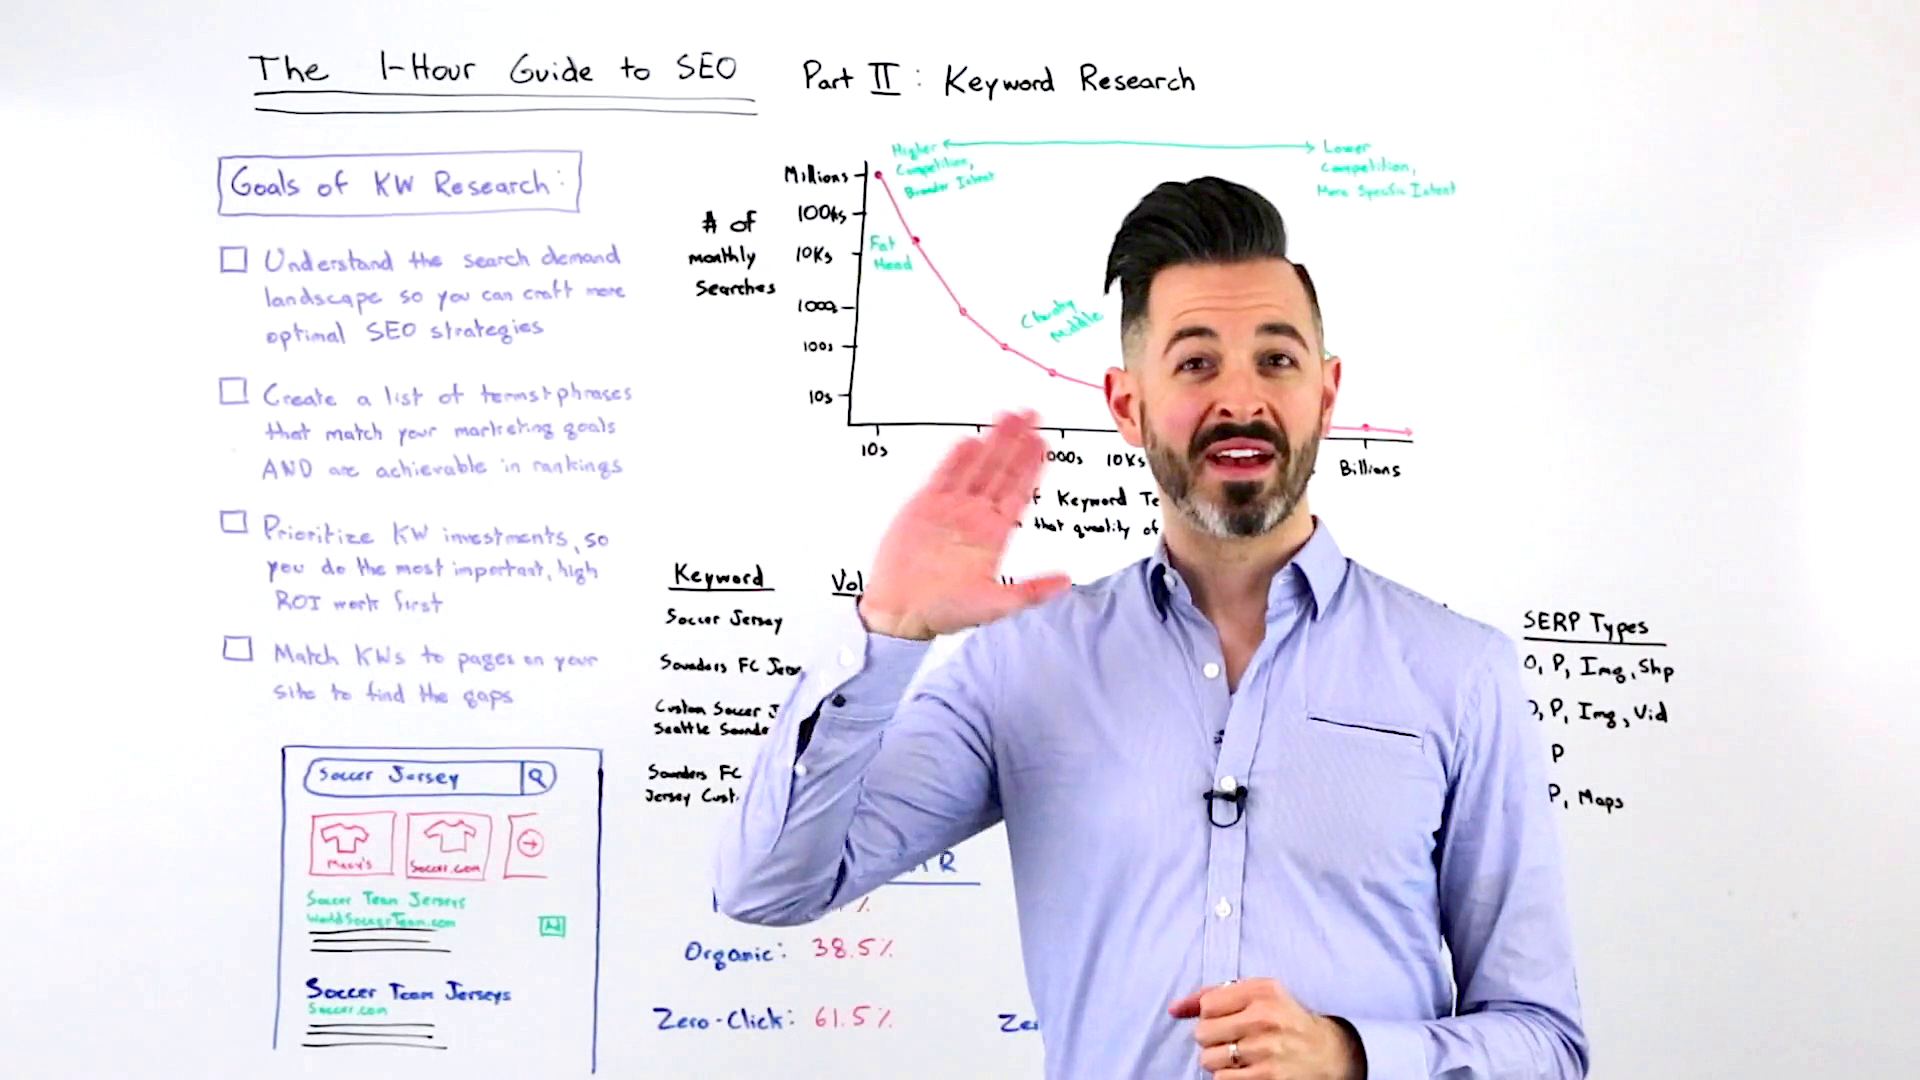 The One-Hour Guide to SEO, Part 2: Keyword Research